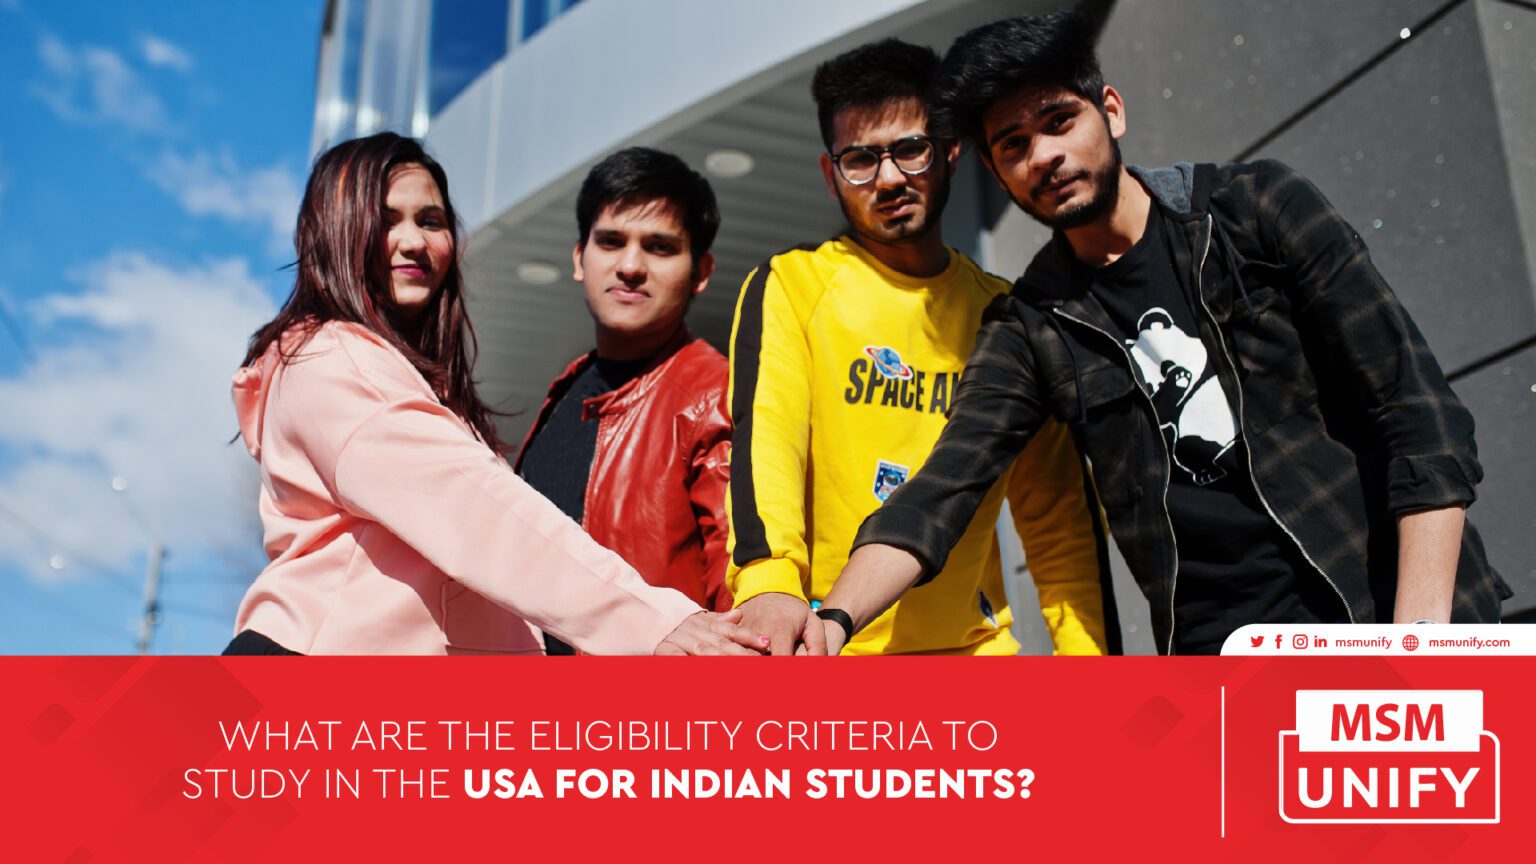 What are eligibility criteria to study in usa for indian students